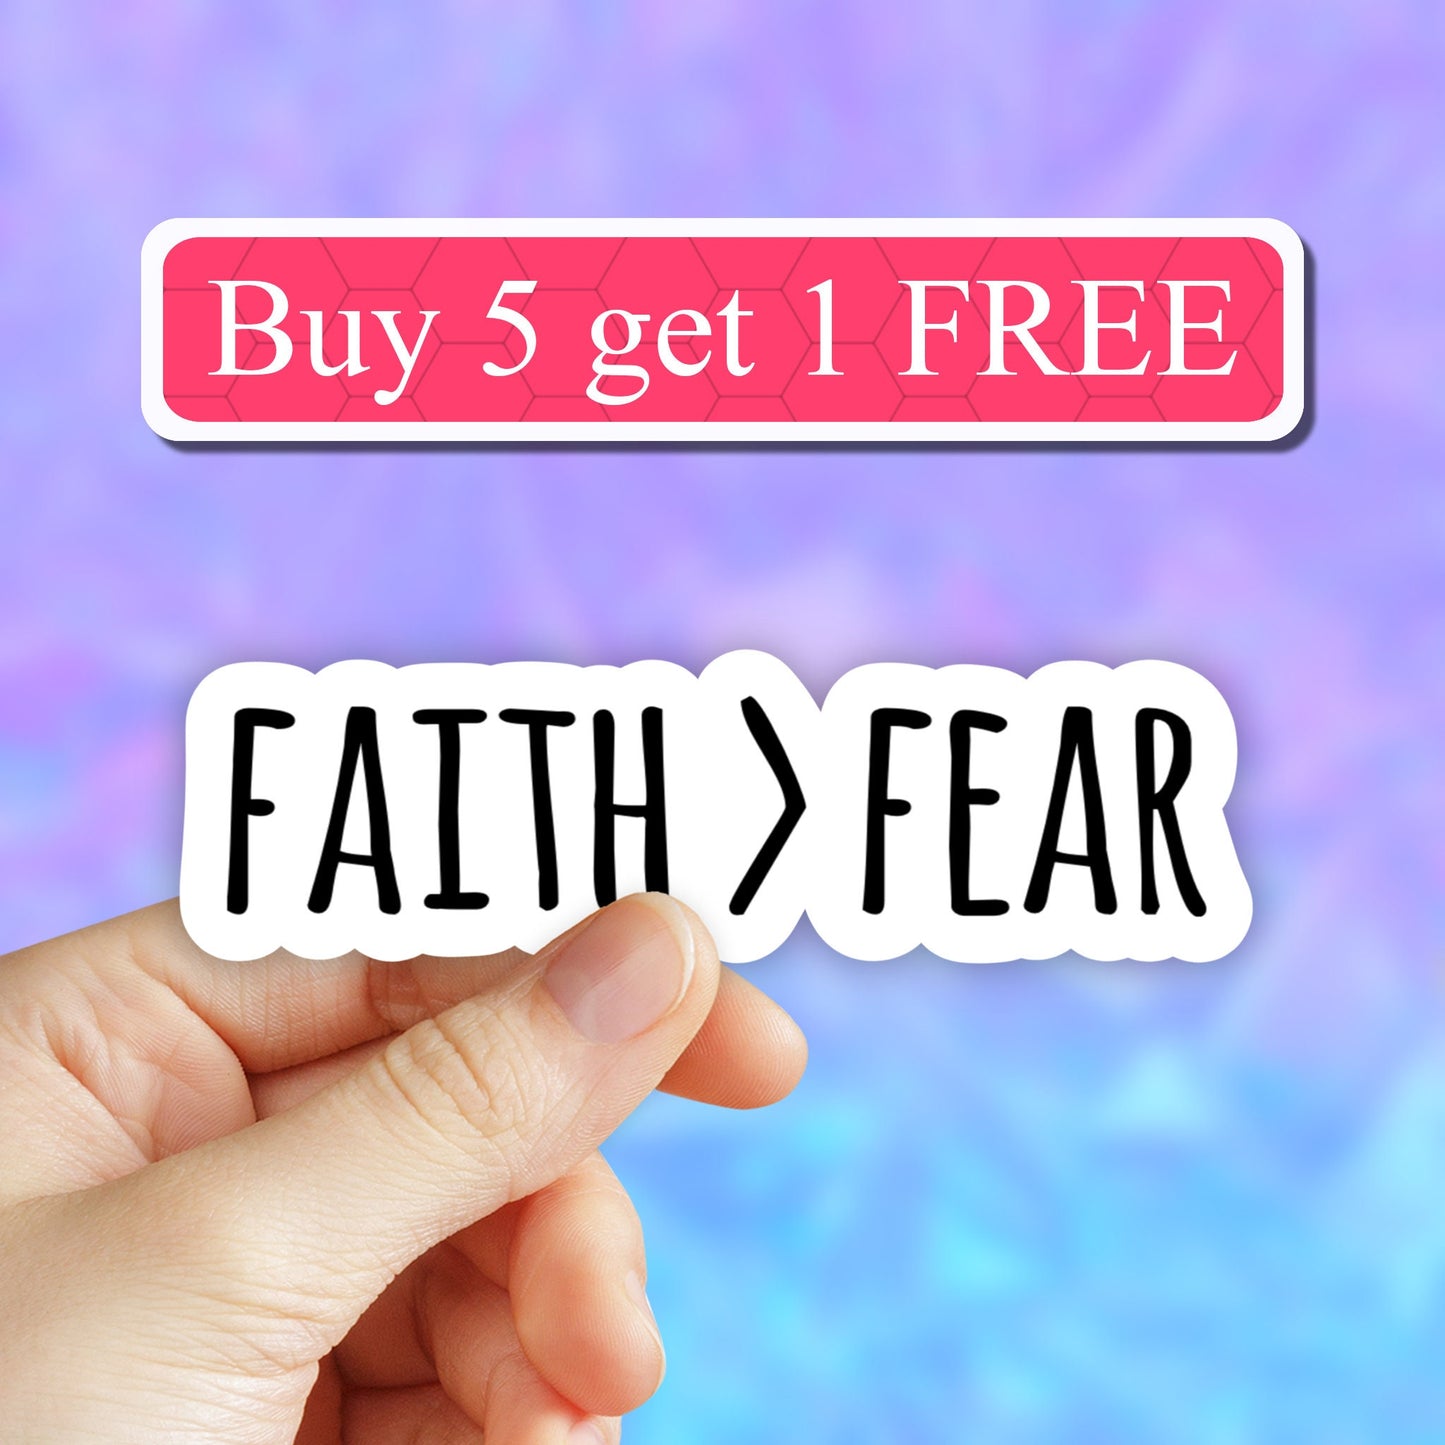 Faith is Greater Than Fear Sticker, Faith Over Fear Sticker, Religious Sticker, Christian Stickers, Laptop Decal, Water bottle Stickers